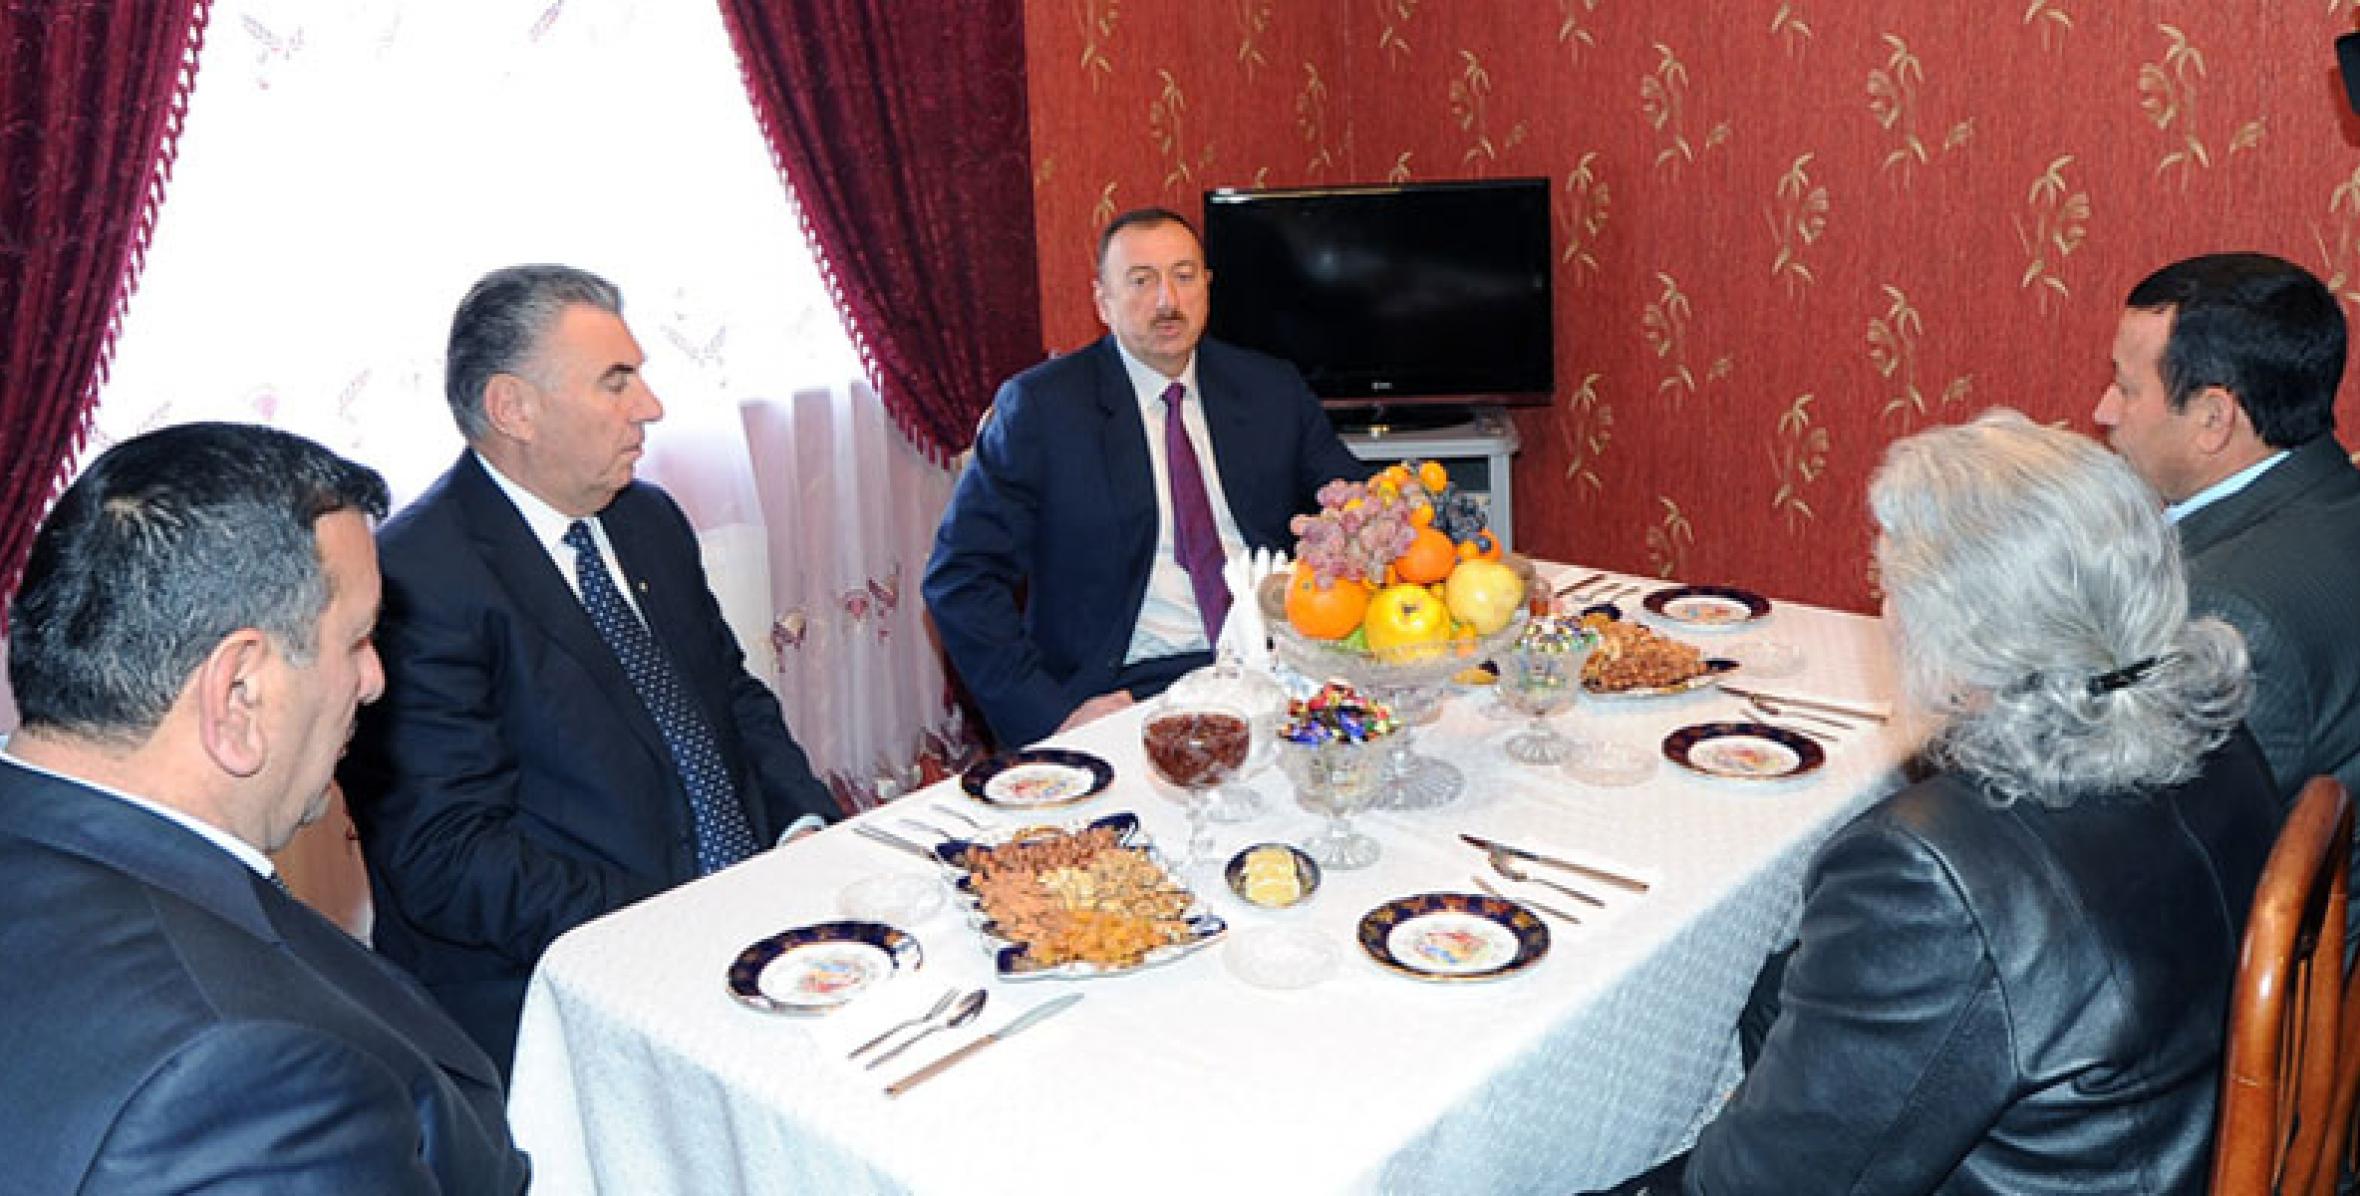 Ilham Aliyev took part in the opening of a new settlement for IDPs in Goranboy